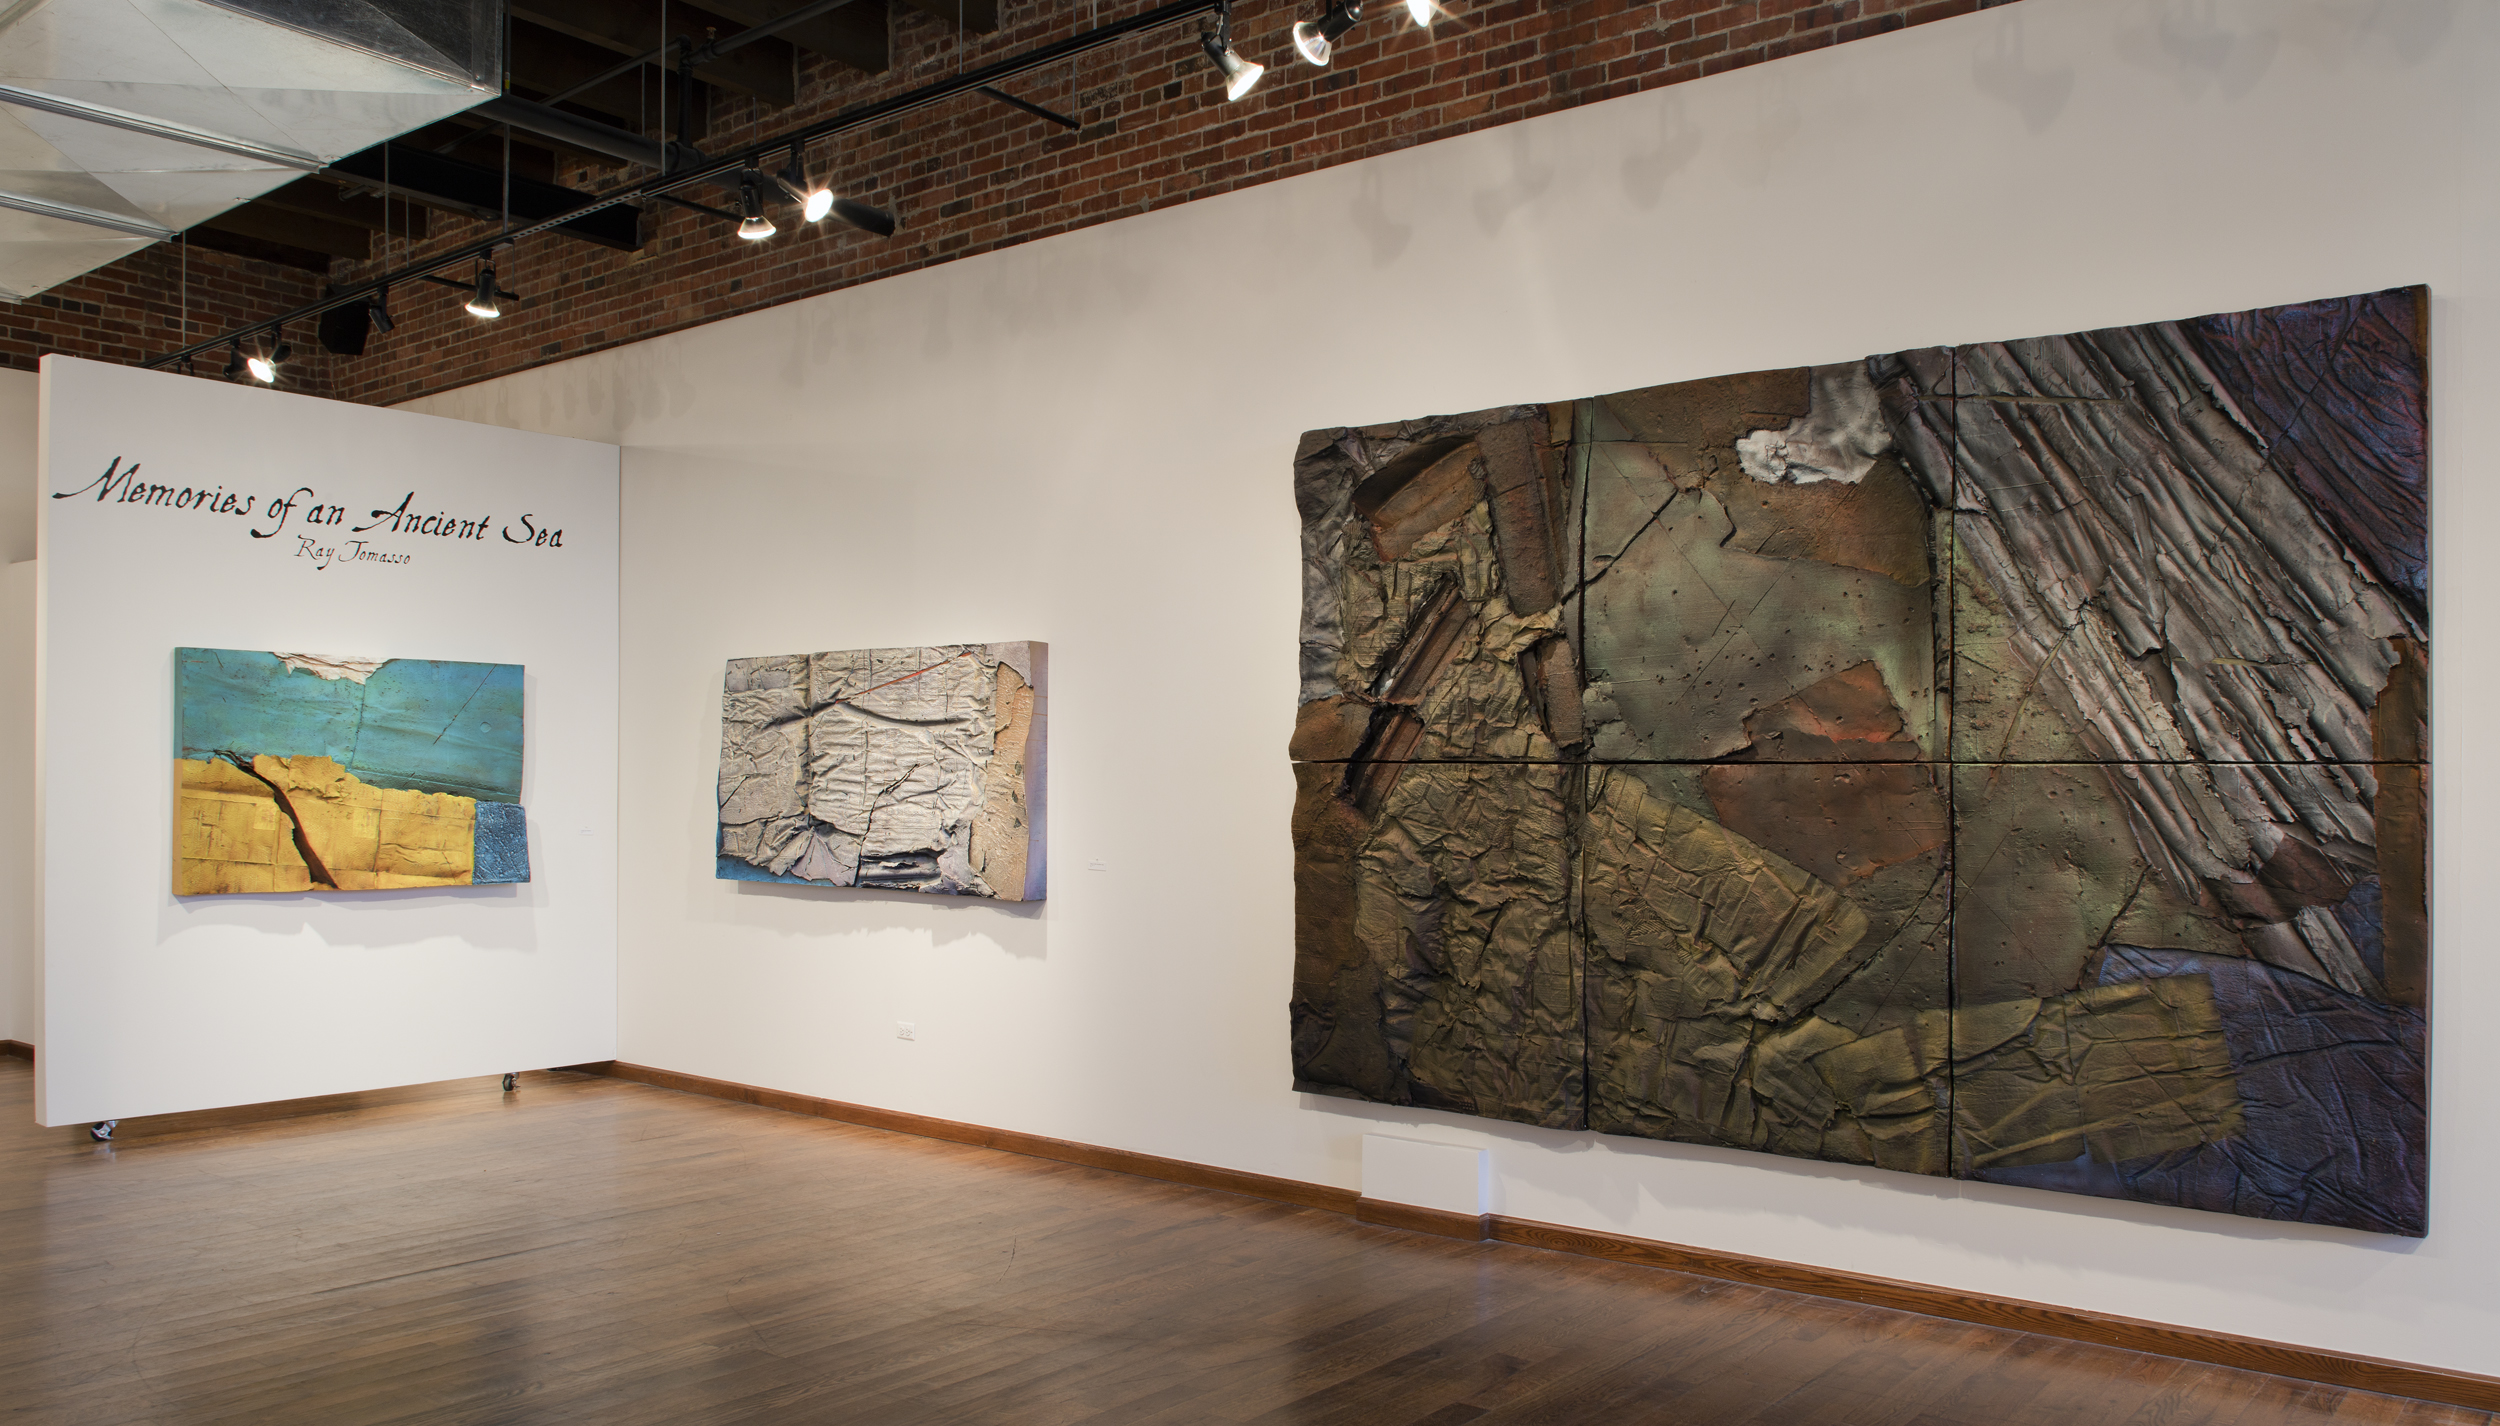 Ray Tomasso Exhibit "Memories of an Ancient Sea"